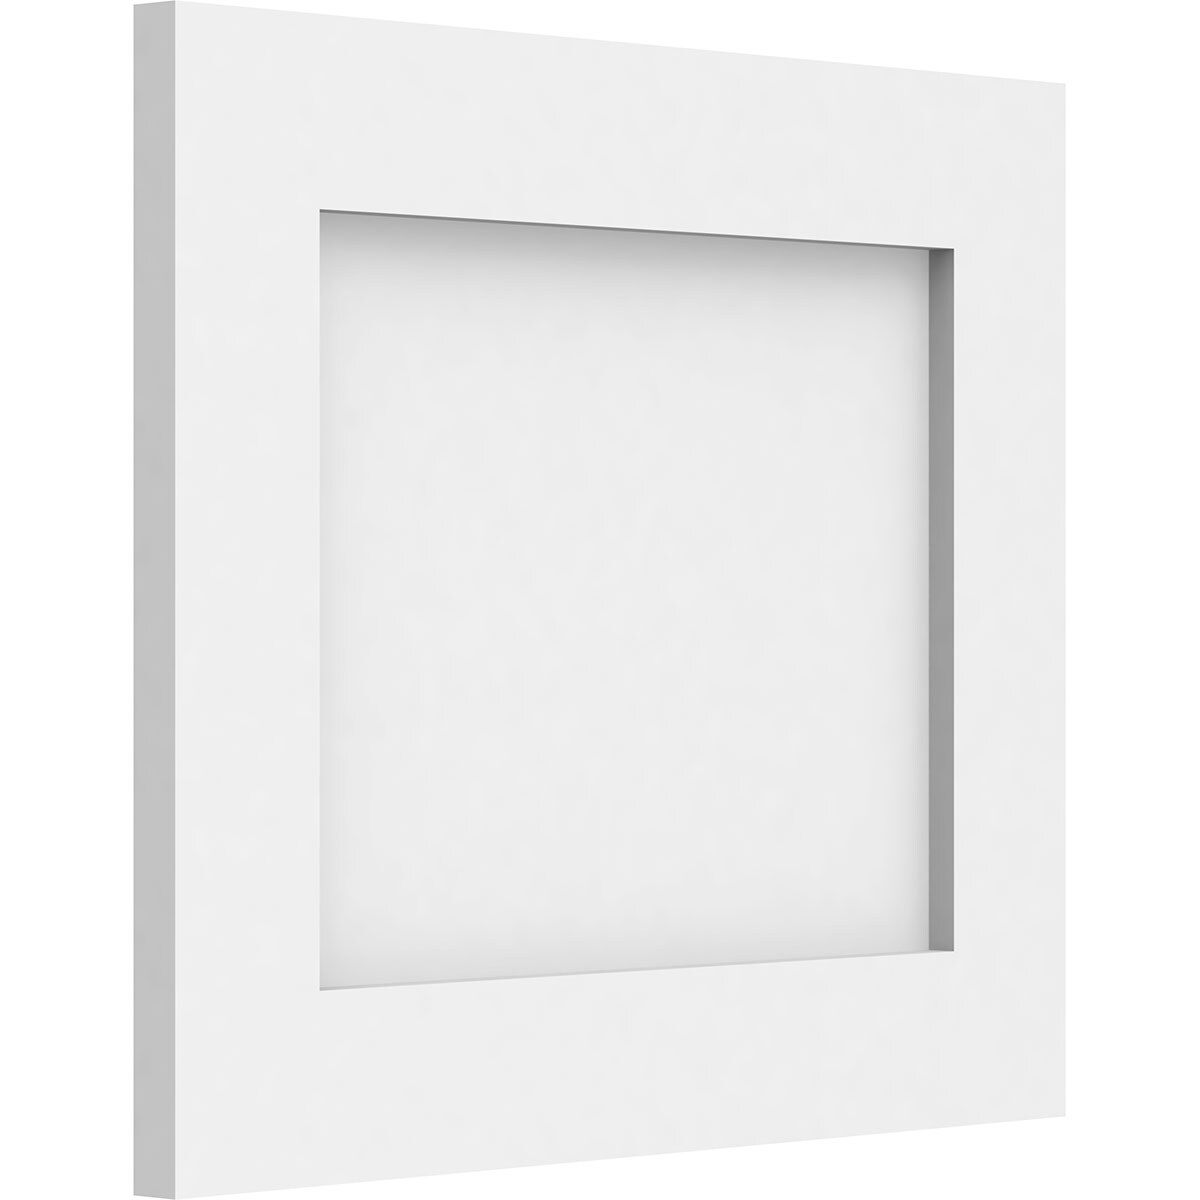 Ekena Millwork 14-in x 12-in Smooth White PVC Wall Panel in the